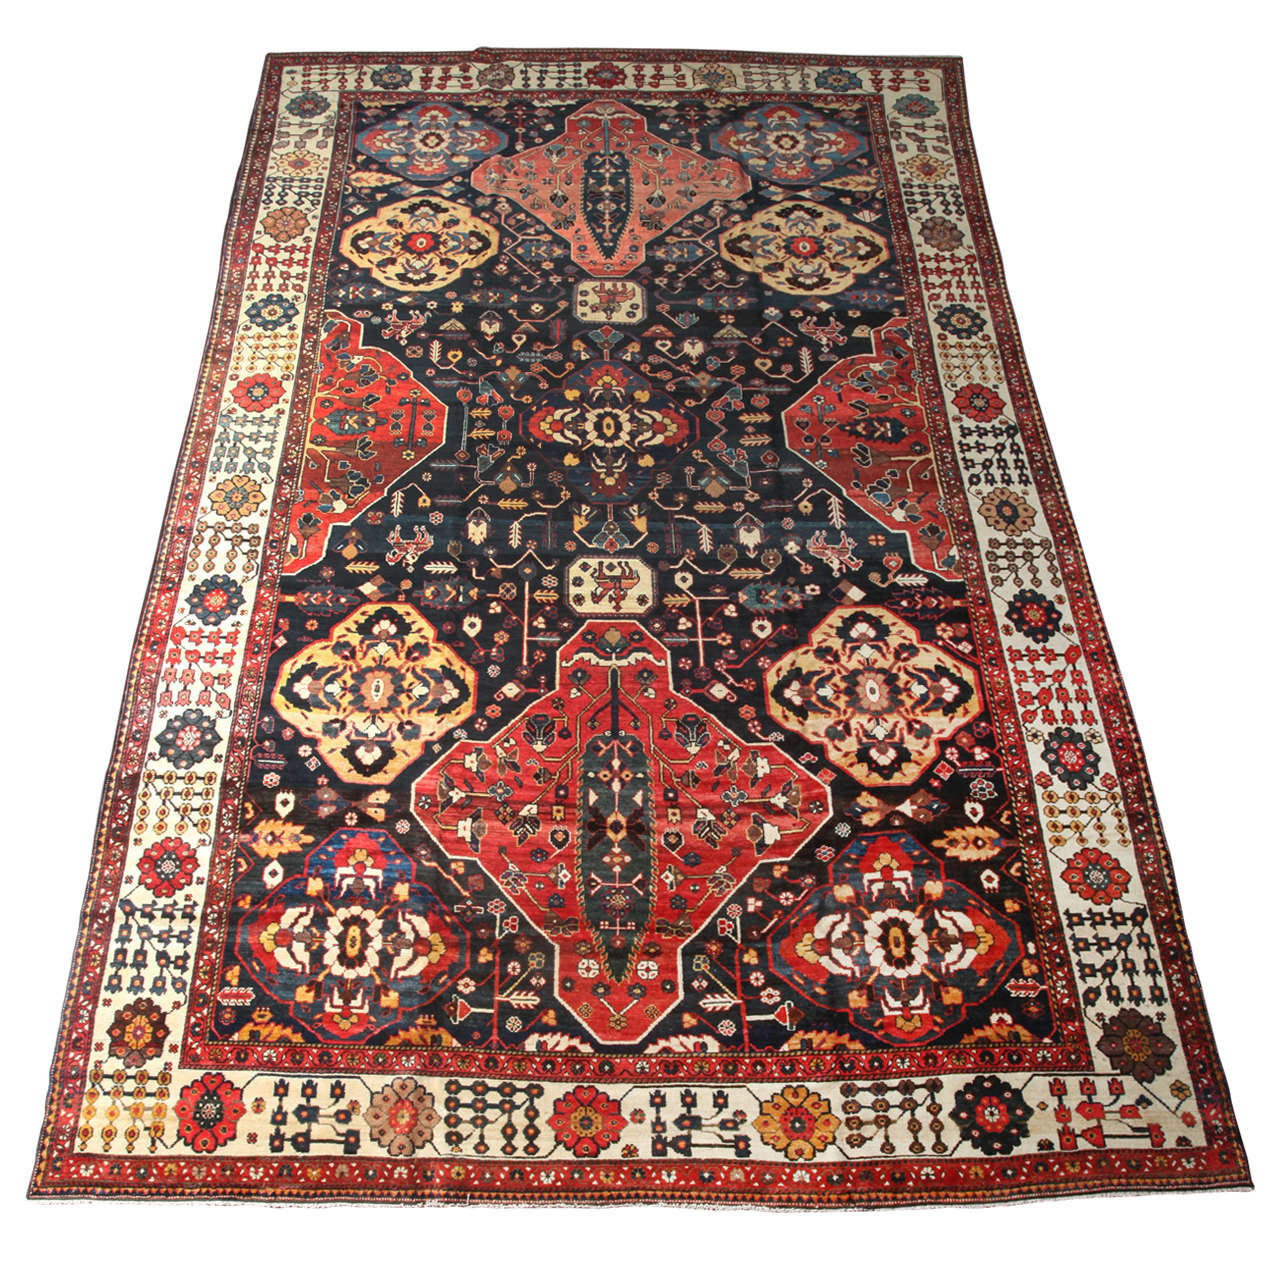 Antique Persian Bakhtiari Rug, Wool, Hand-knotted, Circa 1900, 10’ x 16’